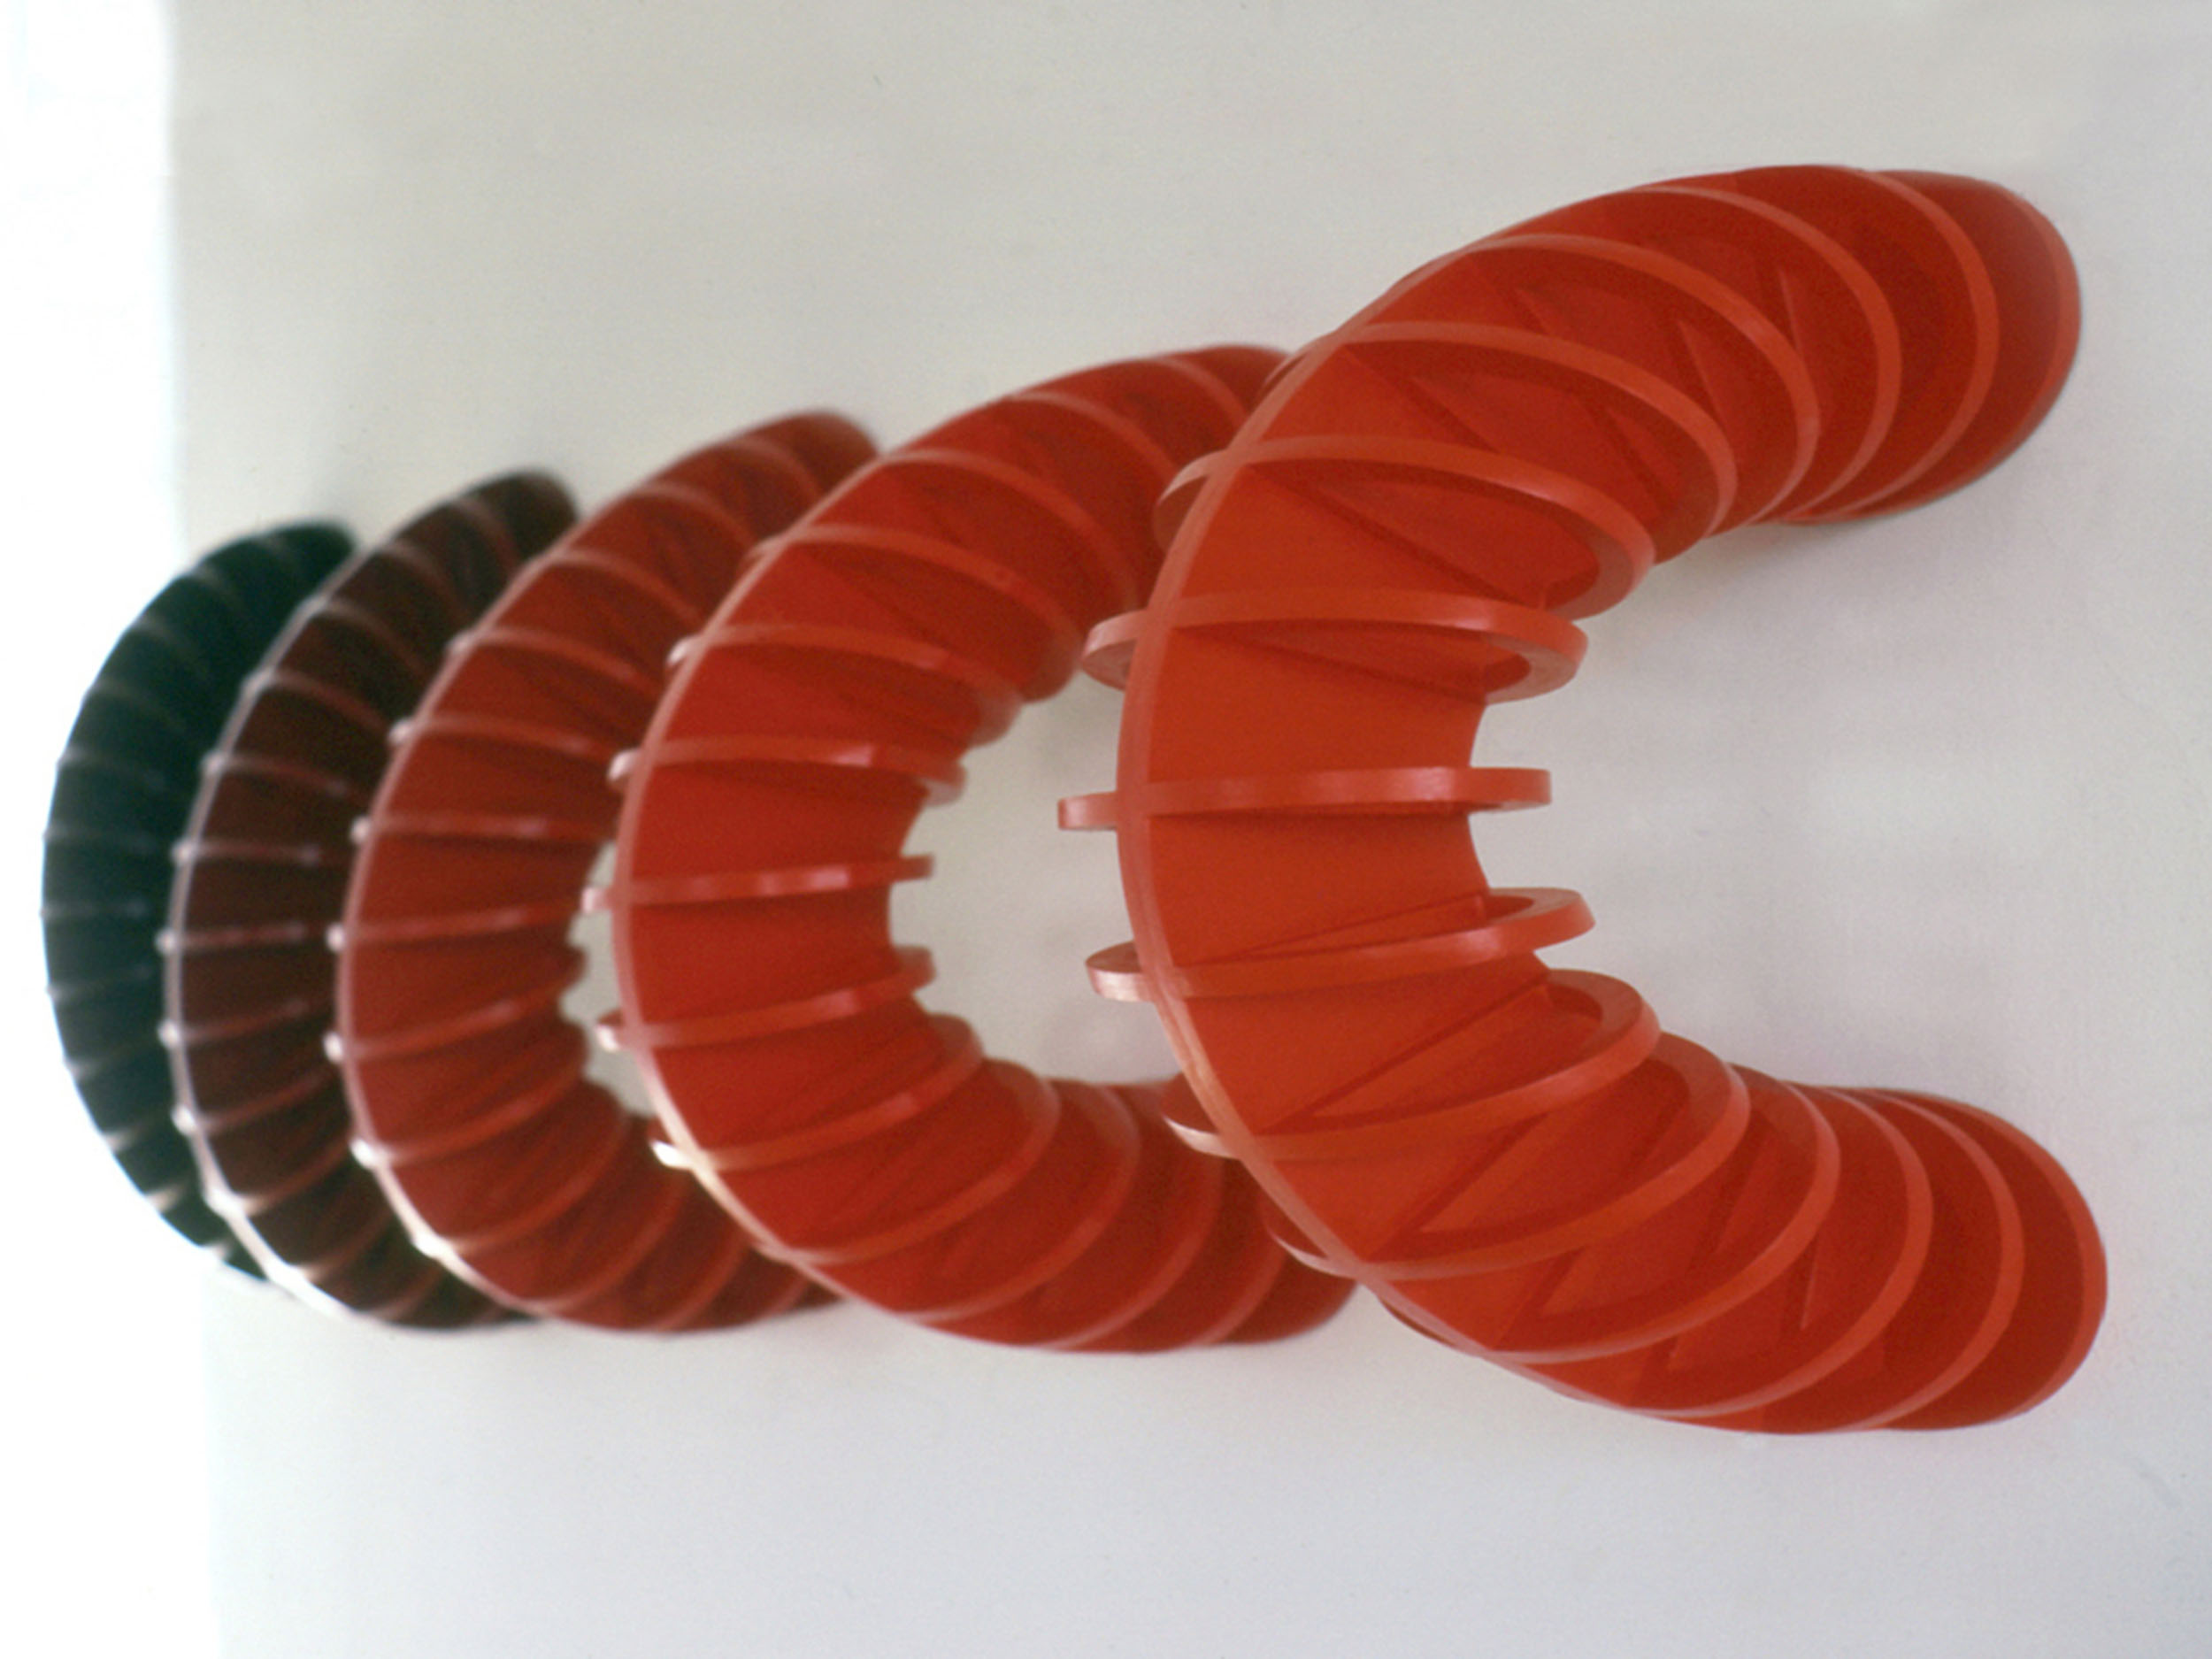 A sculpture comprised of 5 C-shaped semi-circles attached to the wall by their end points in a line. Each is similar to the next except for the color, which is an increasingly darker shade of red for each piece.